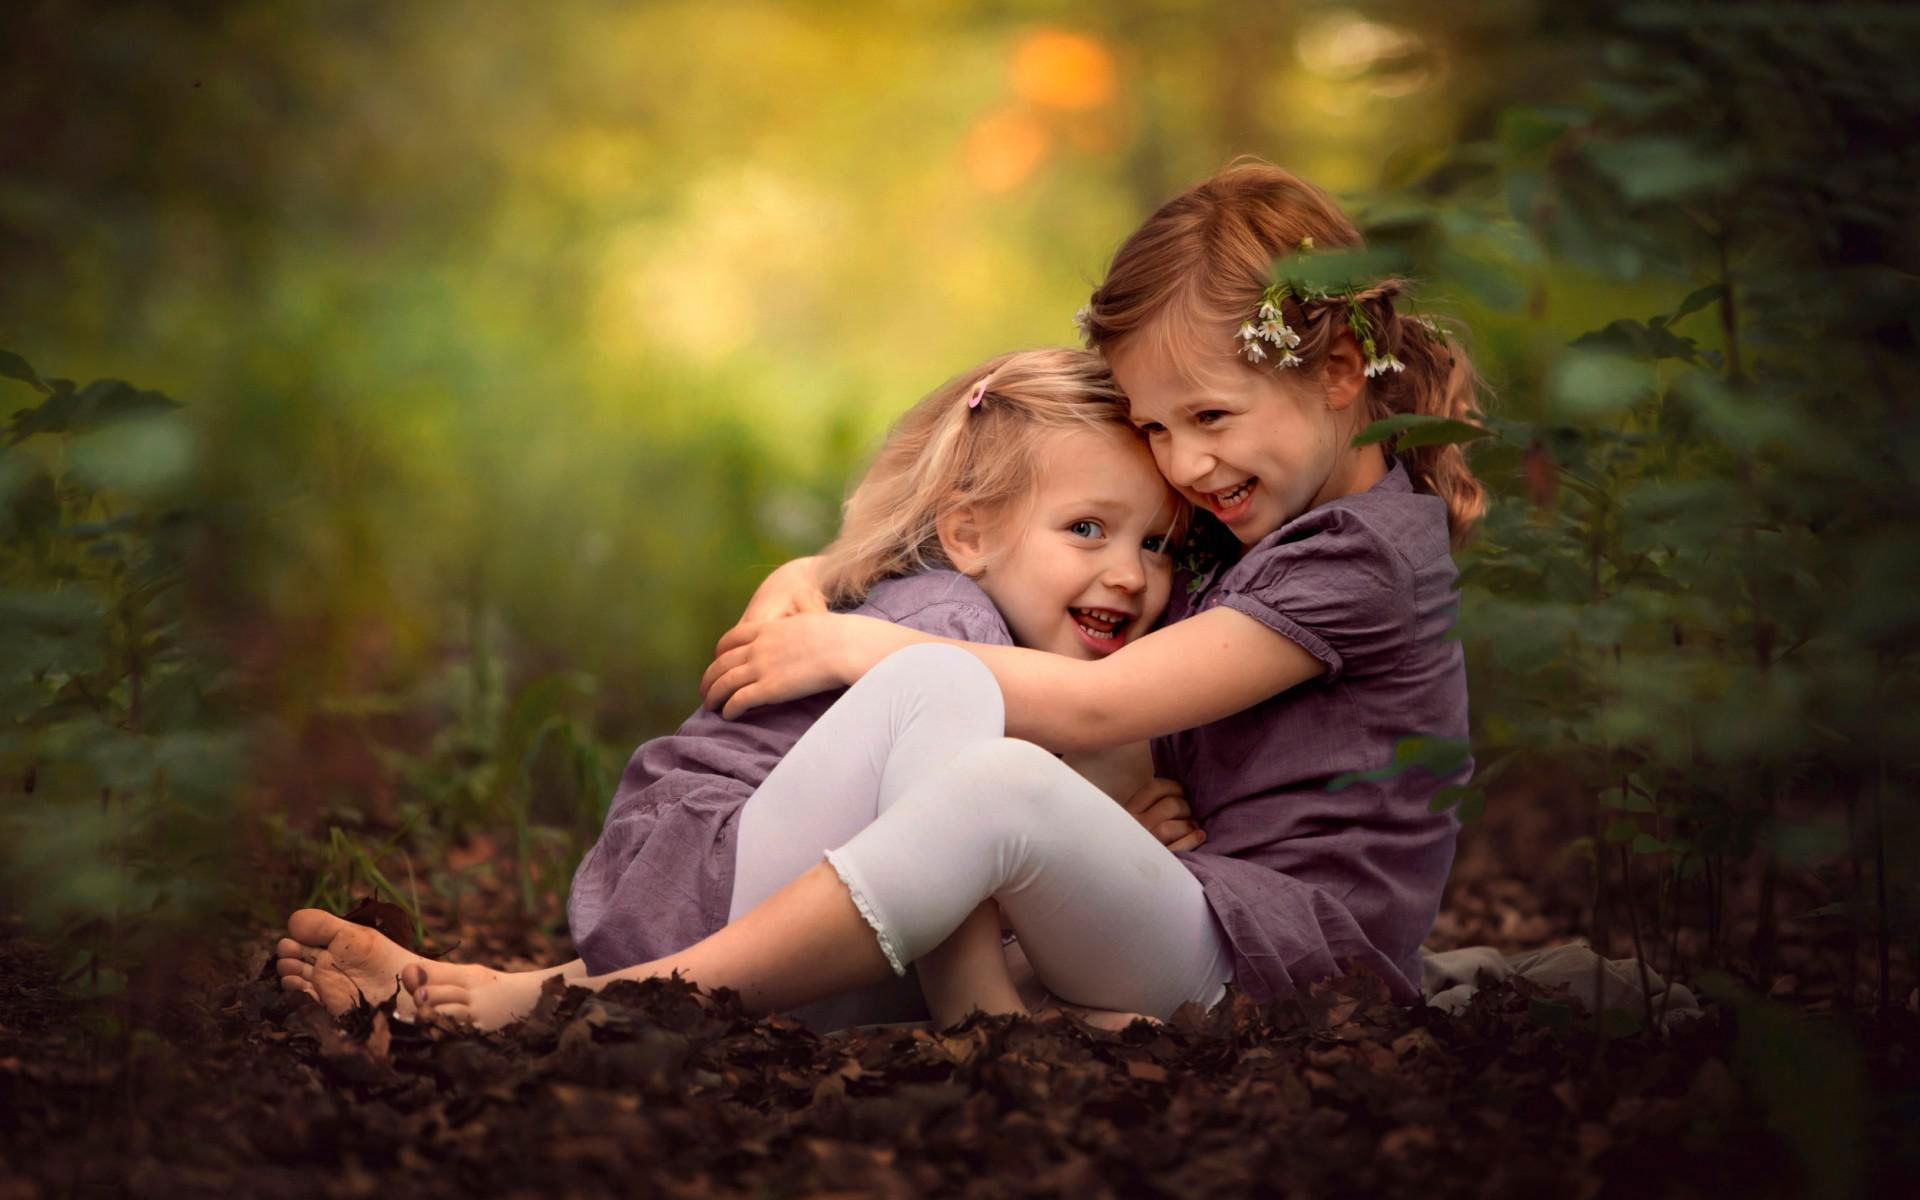 Cute Sister Laughter wallpaper, baby, girl • Wallpaper For You HD